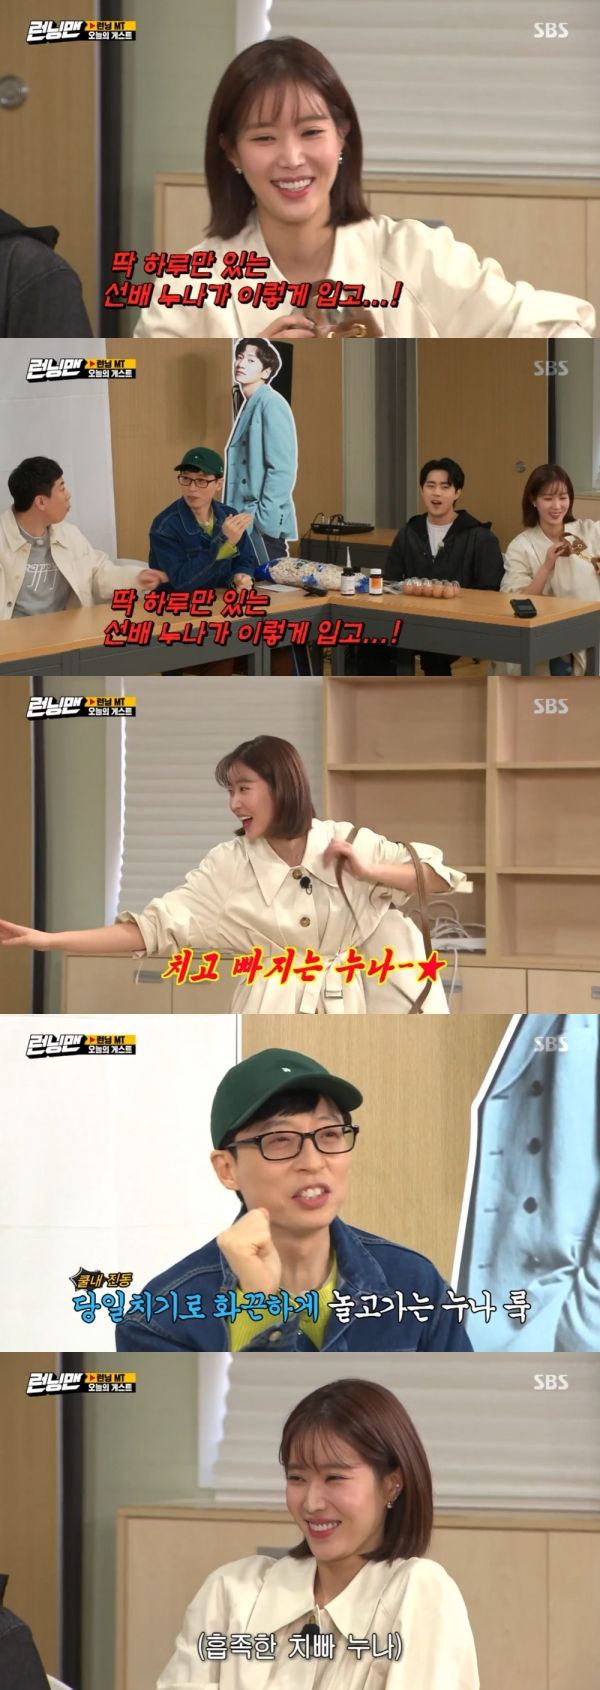 Im Soo-hyang showed MT fashion.On SBS Running Man broadcasted on the 15th, Yoo Jae-Suk laughed at the attire of guest Im Soo-hyang.On this day, Im Soo-hyang joined the Running Man MT and was welcomed by the members.Yoo Jae-Suk said, I used to wear a college, a senior sister who had a day when I went to college for two nights and three days.My sister who falls in and out; she always puts her sunglasses up, Haha added.Yoo Jae-Suk said, I came for a while and said, I have something tomorrow. Have fun.Meanwhile, Lim also recalled drinking with Jeon So-min. Lim said, I ran away. I keep feeding alcohol to games.Kim Jong Kook said, Is it a professional gamer? And Jeon So-min laughed, saying, Running man made it like this.